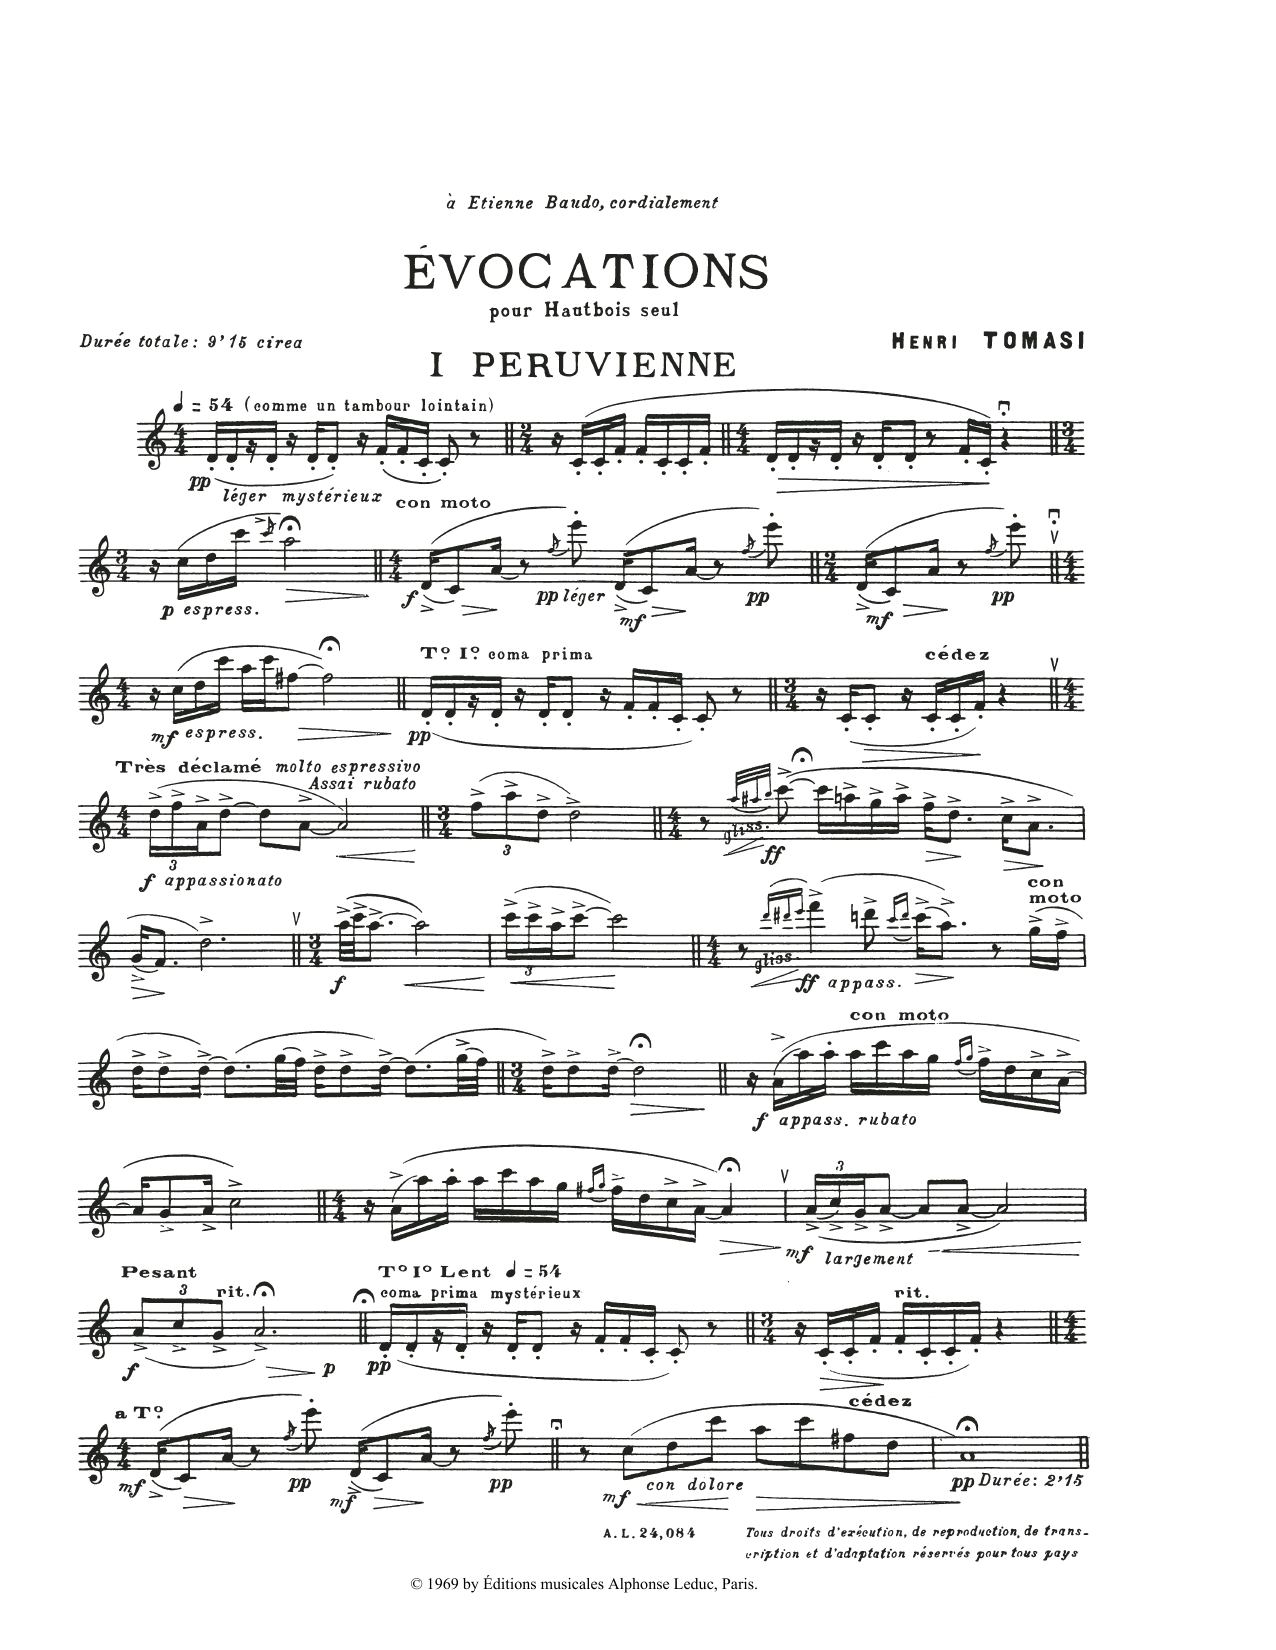 Download Henry Tomasi Evocations Sheet Music